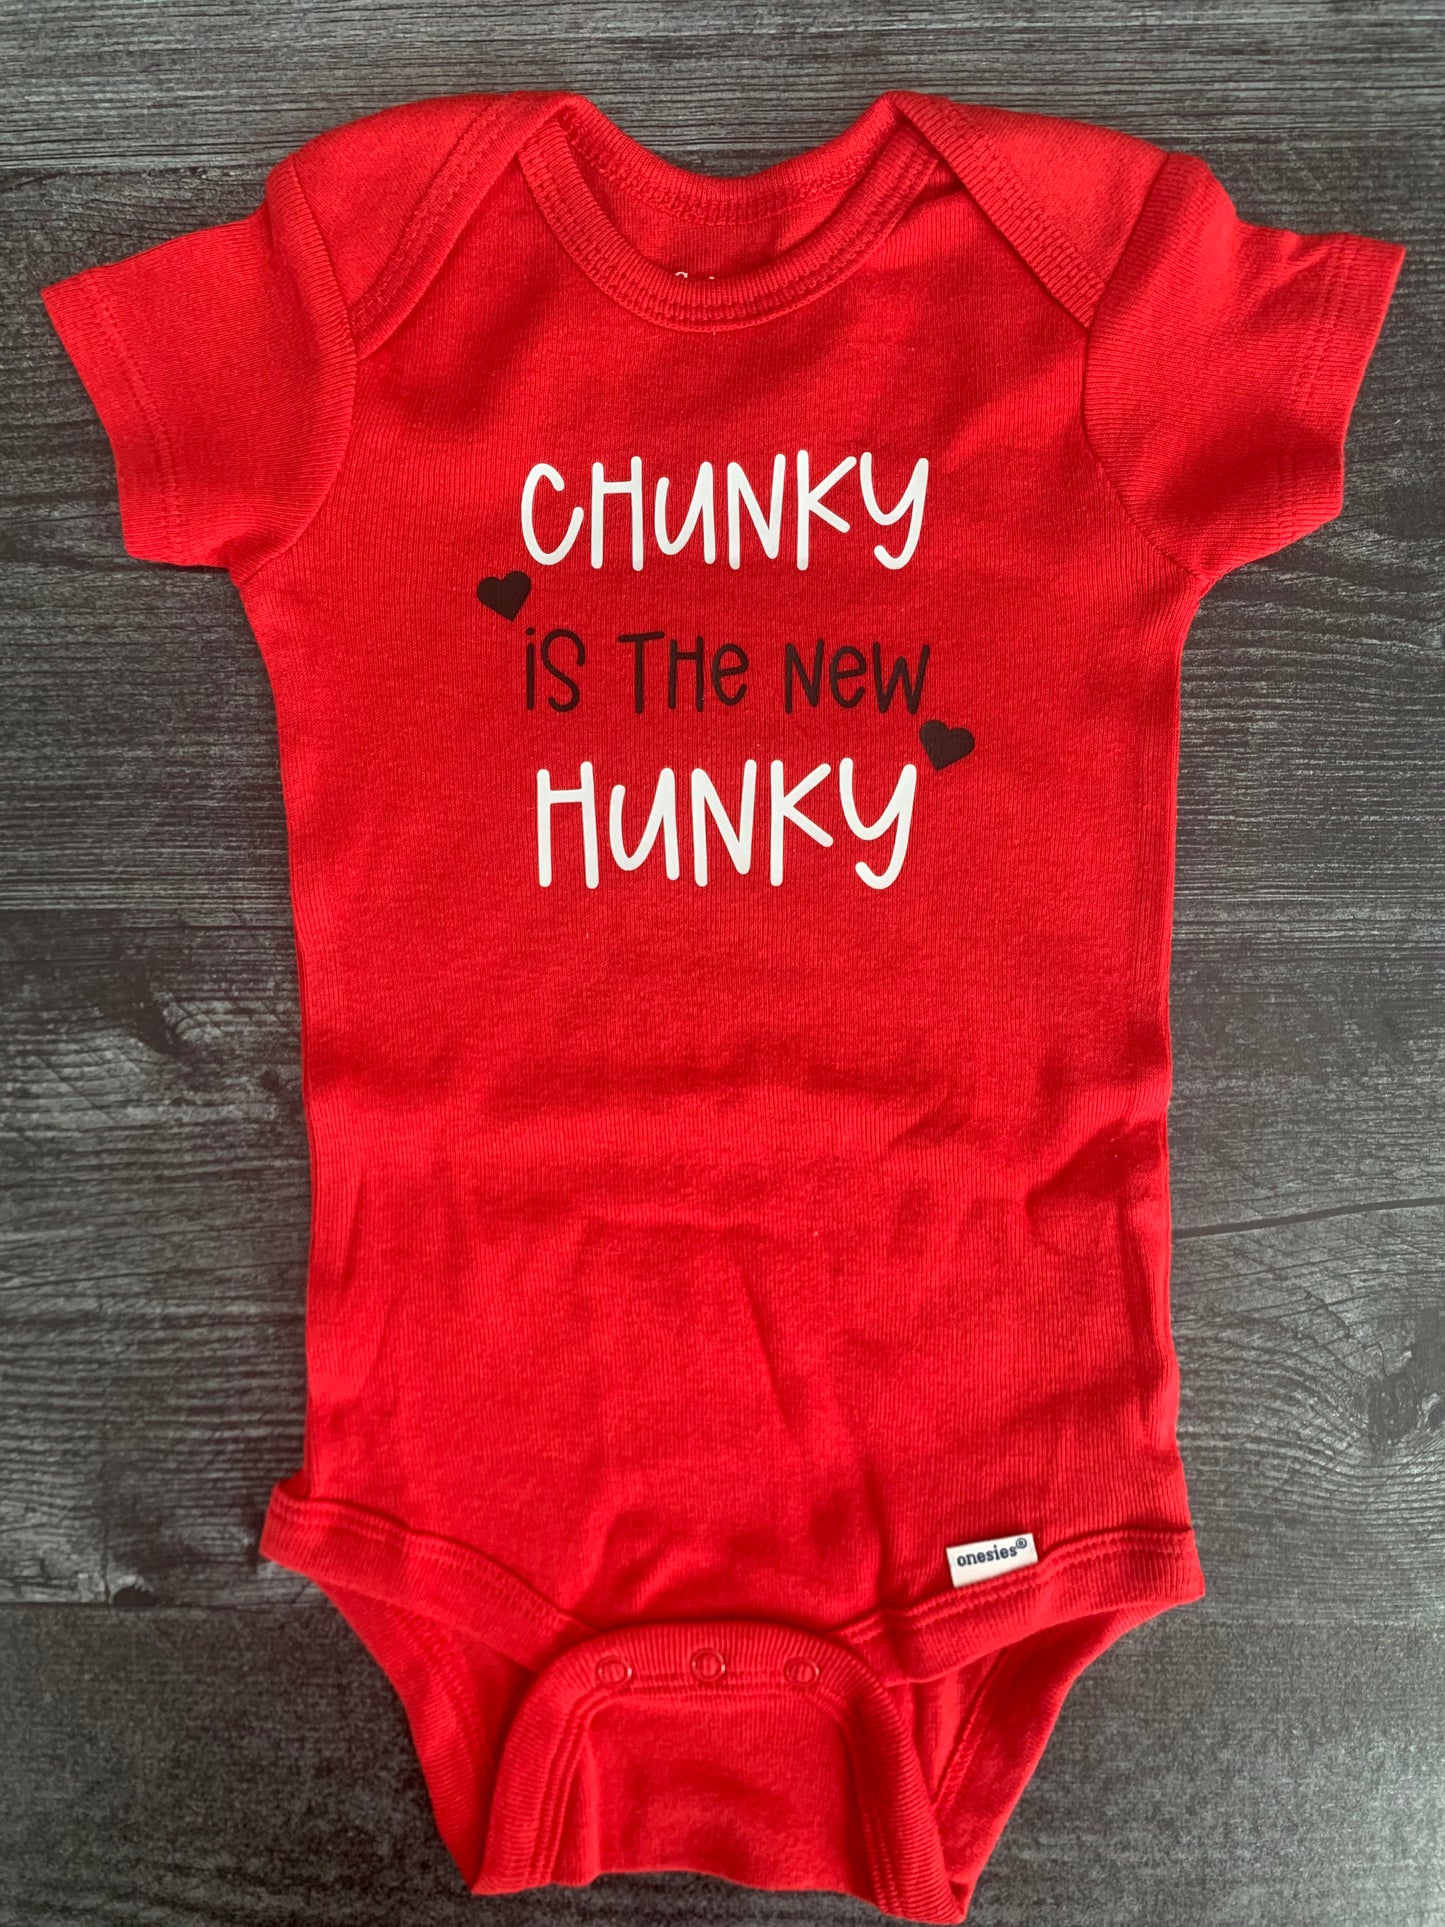 Chunky is the New Hunky - Baby Onesie